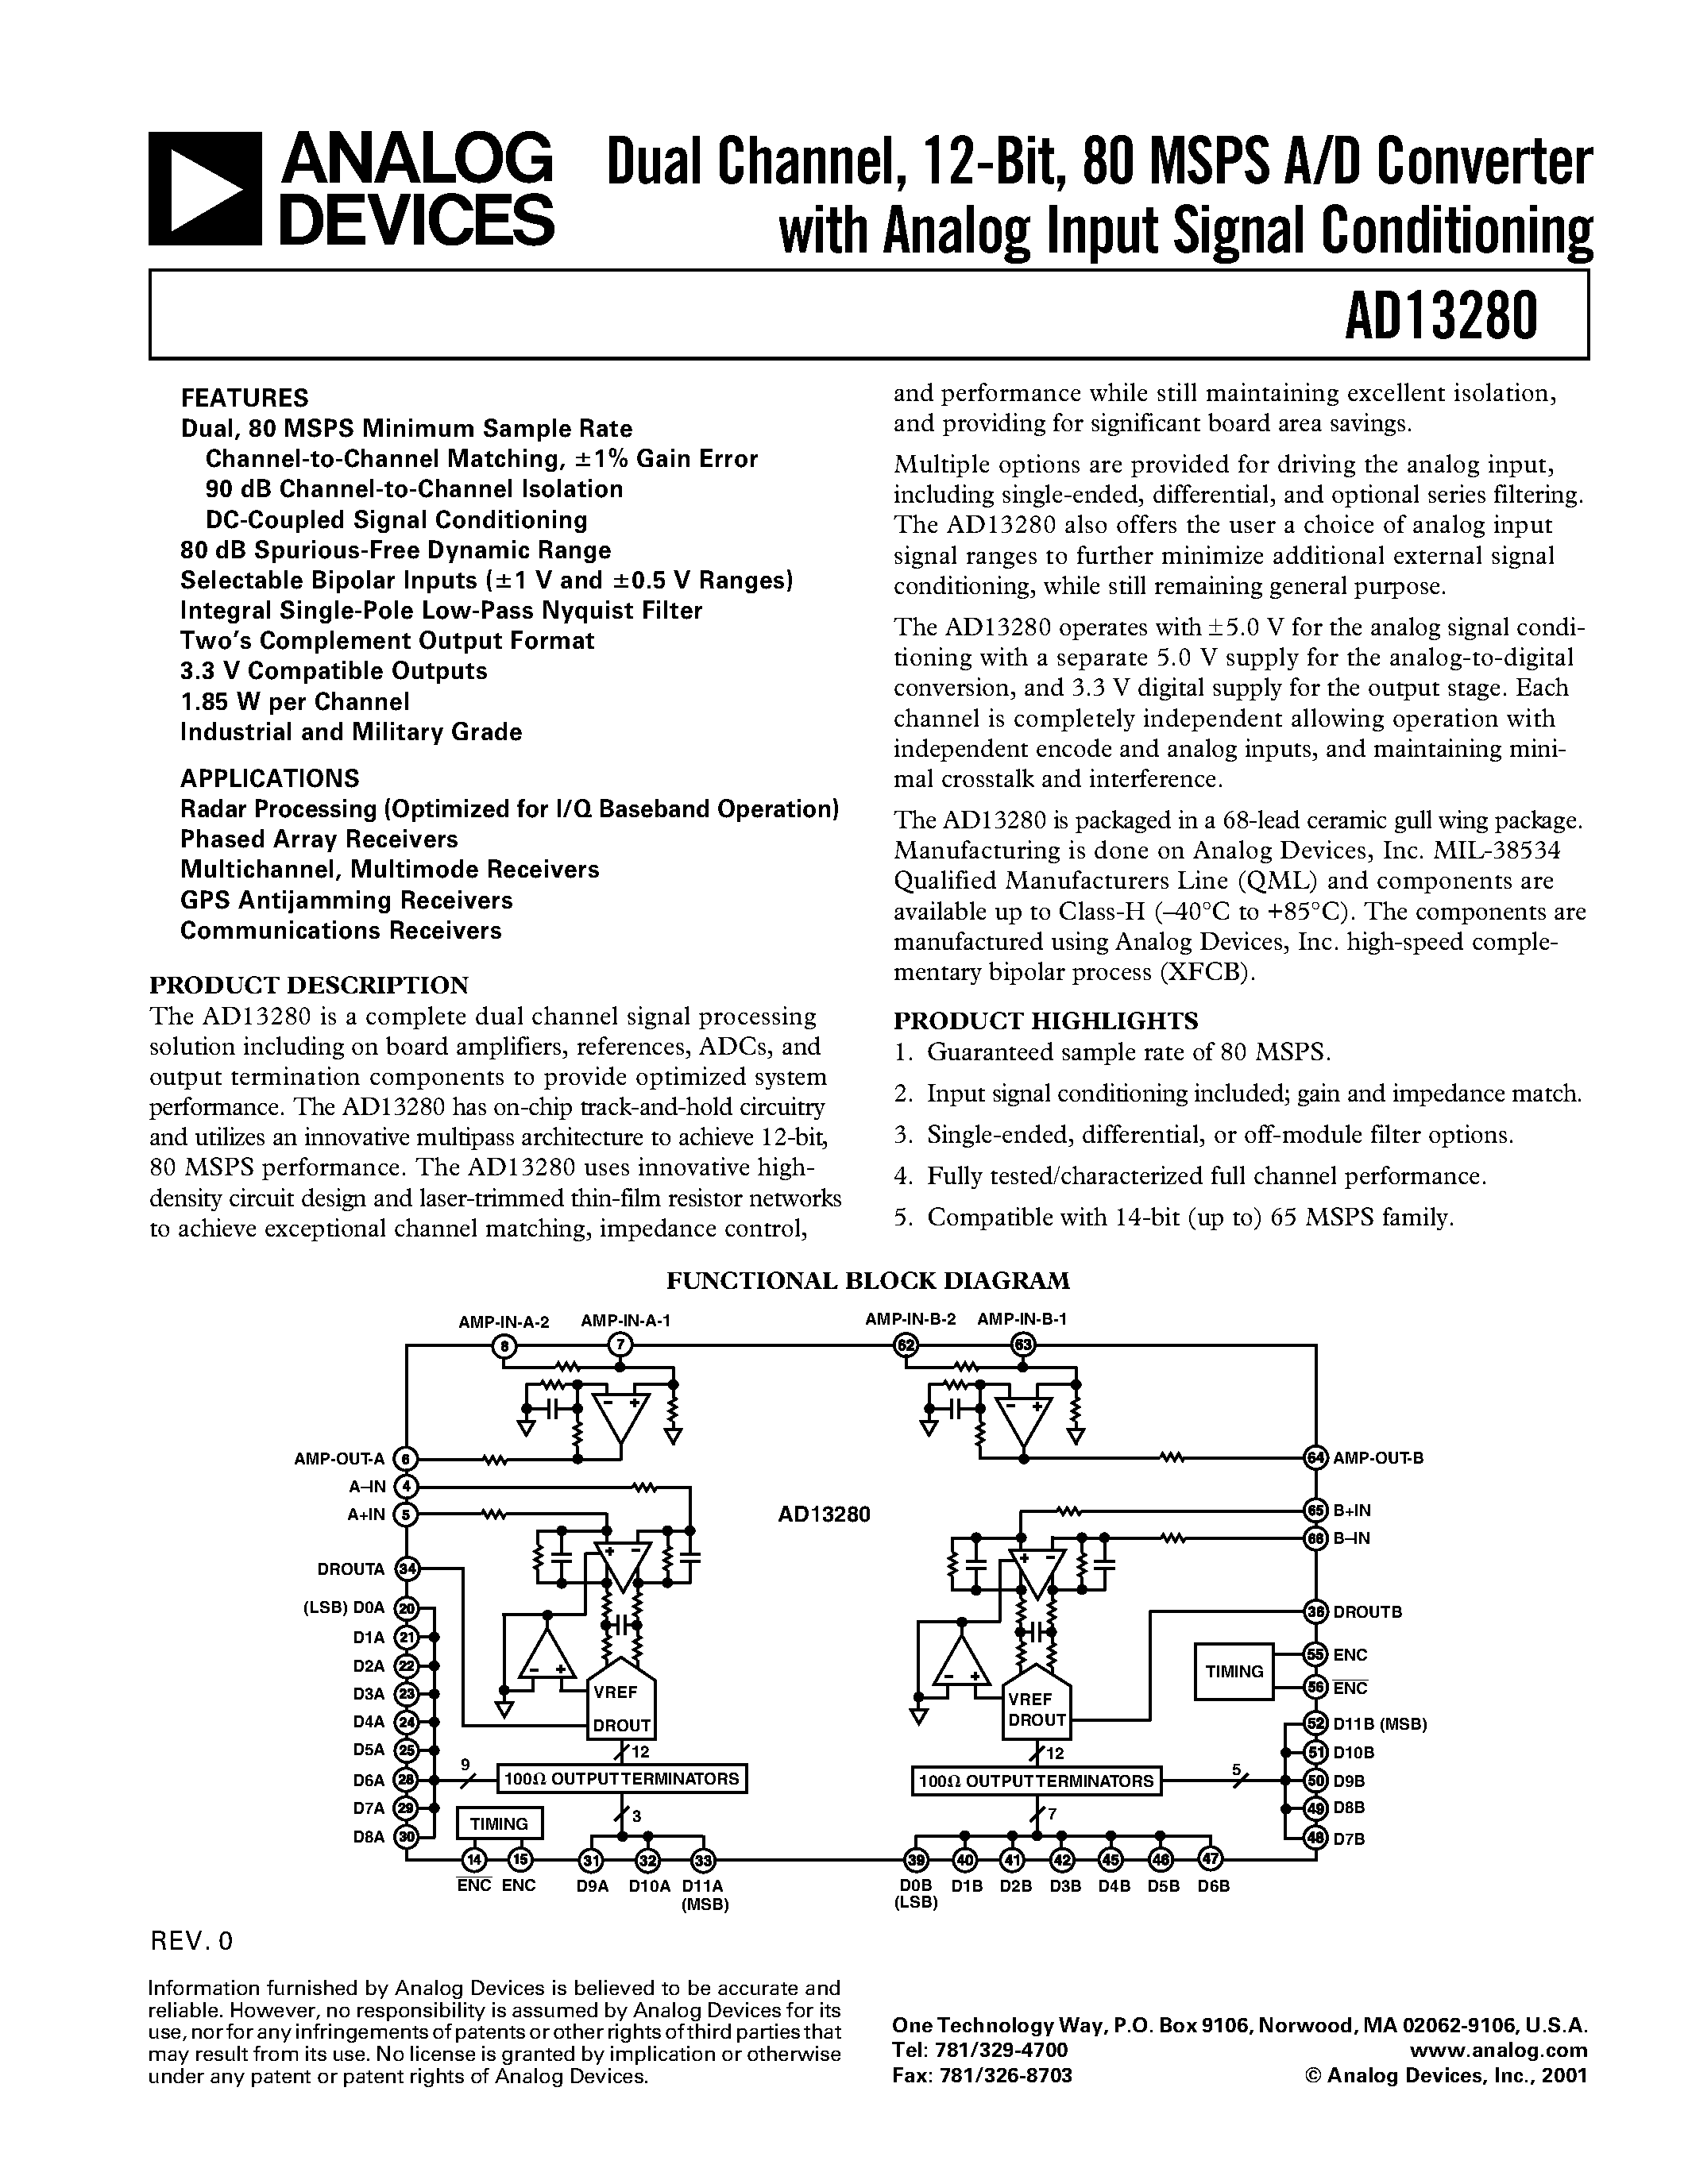 Даташит AD13280AZ - Dual Channel/ 12-Bit/ 80 MSPS A/D Converter with Analog Input Signal Conditioning страница 1